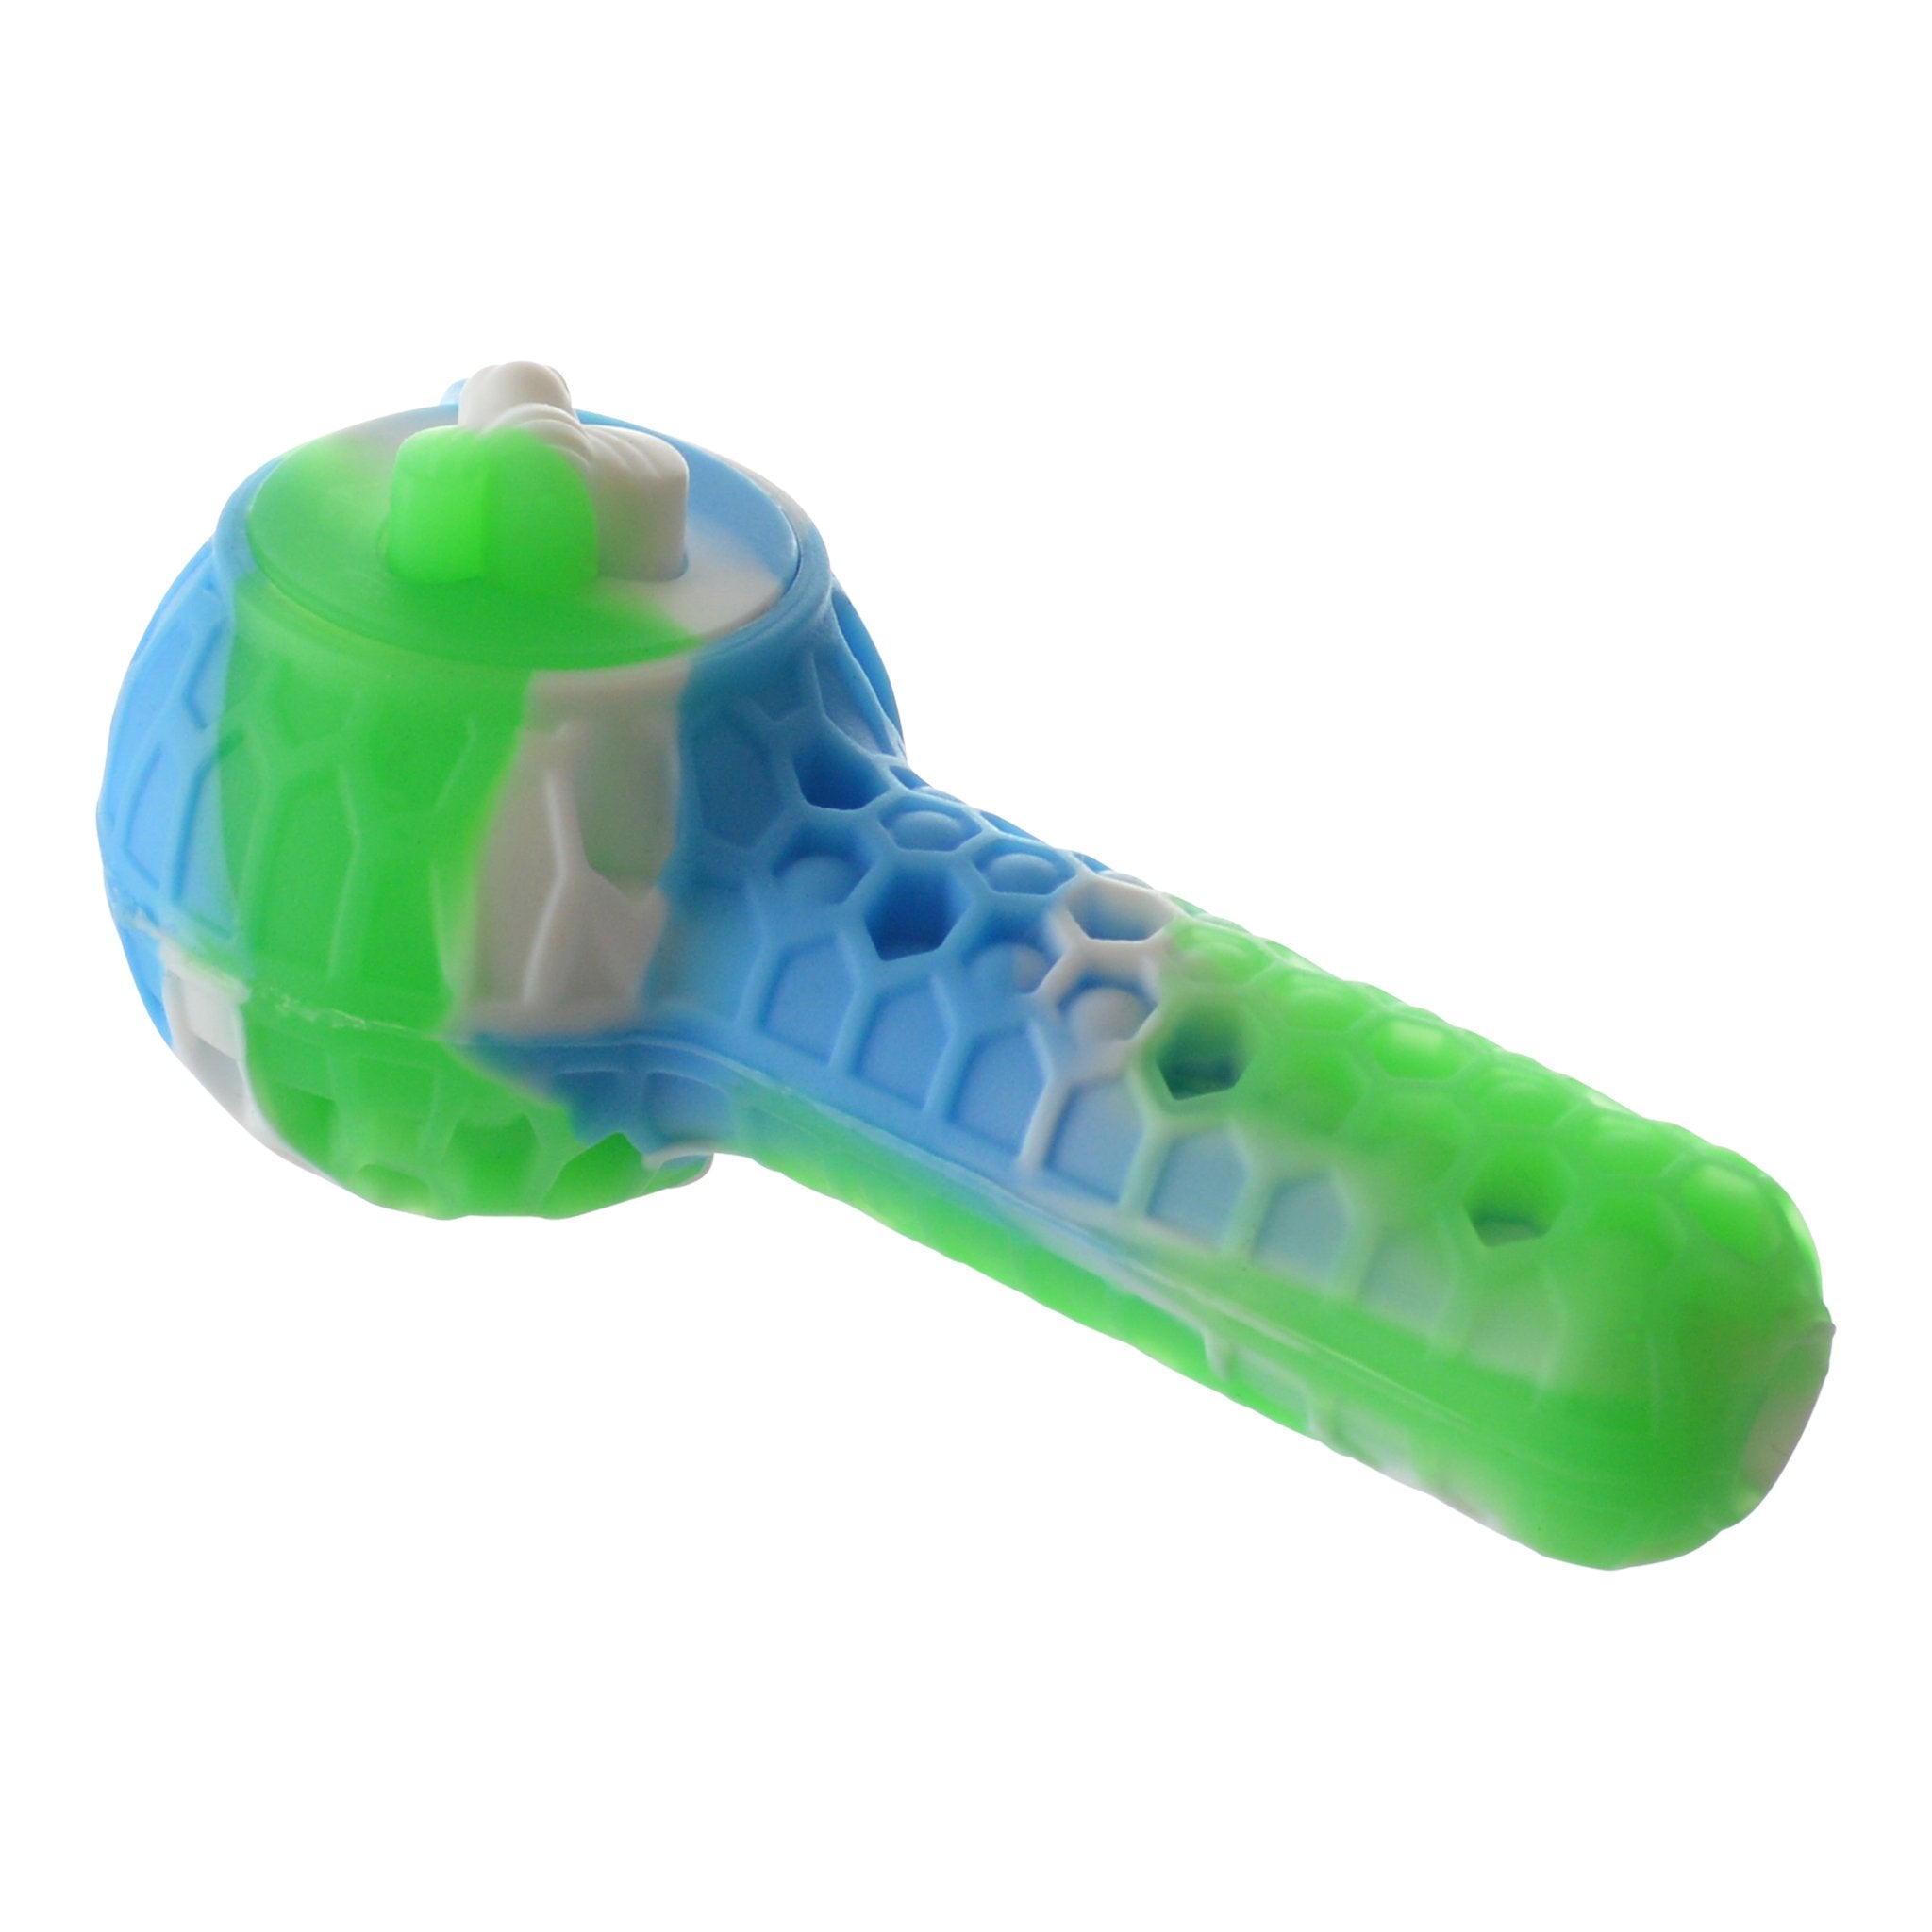 2 in 1 Silicone Pipe - 4.5in Green / Blue